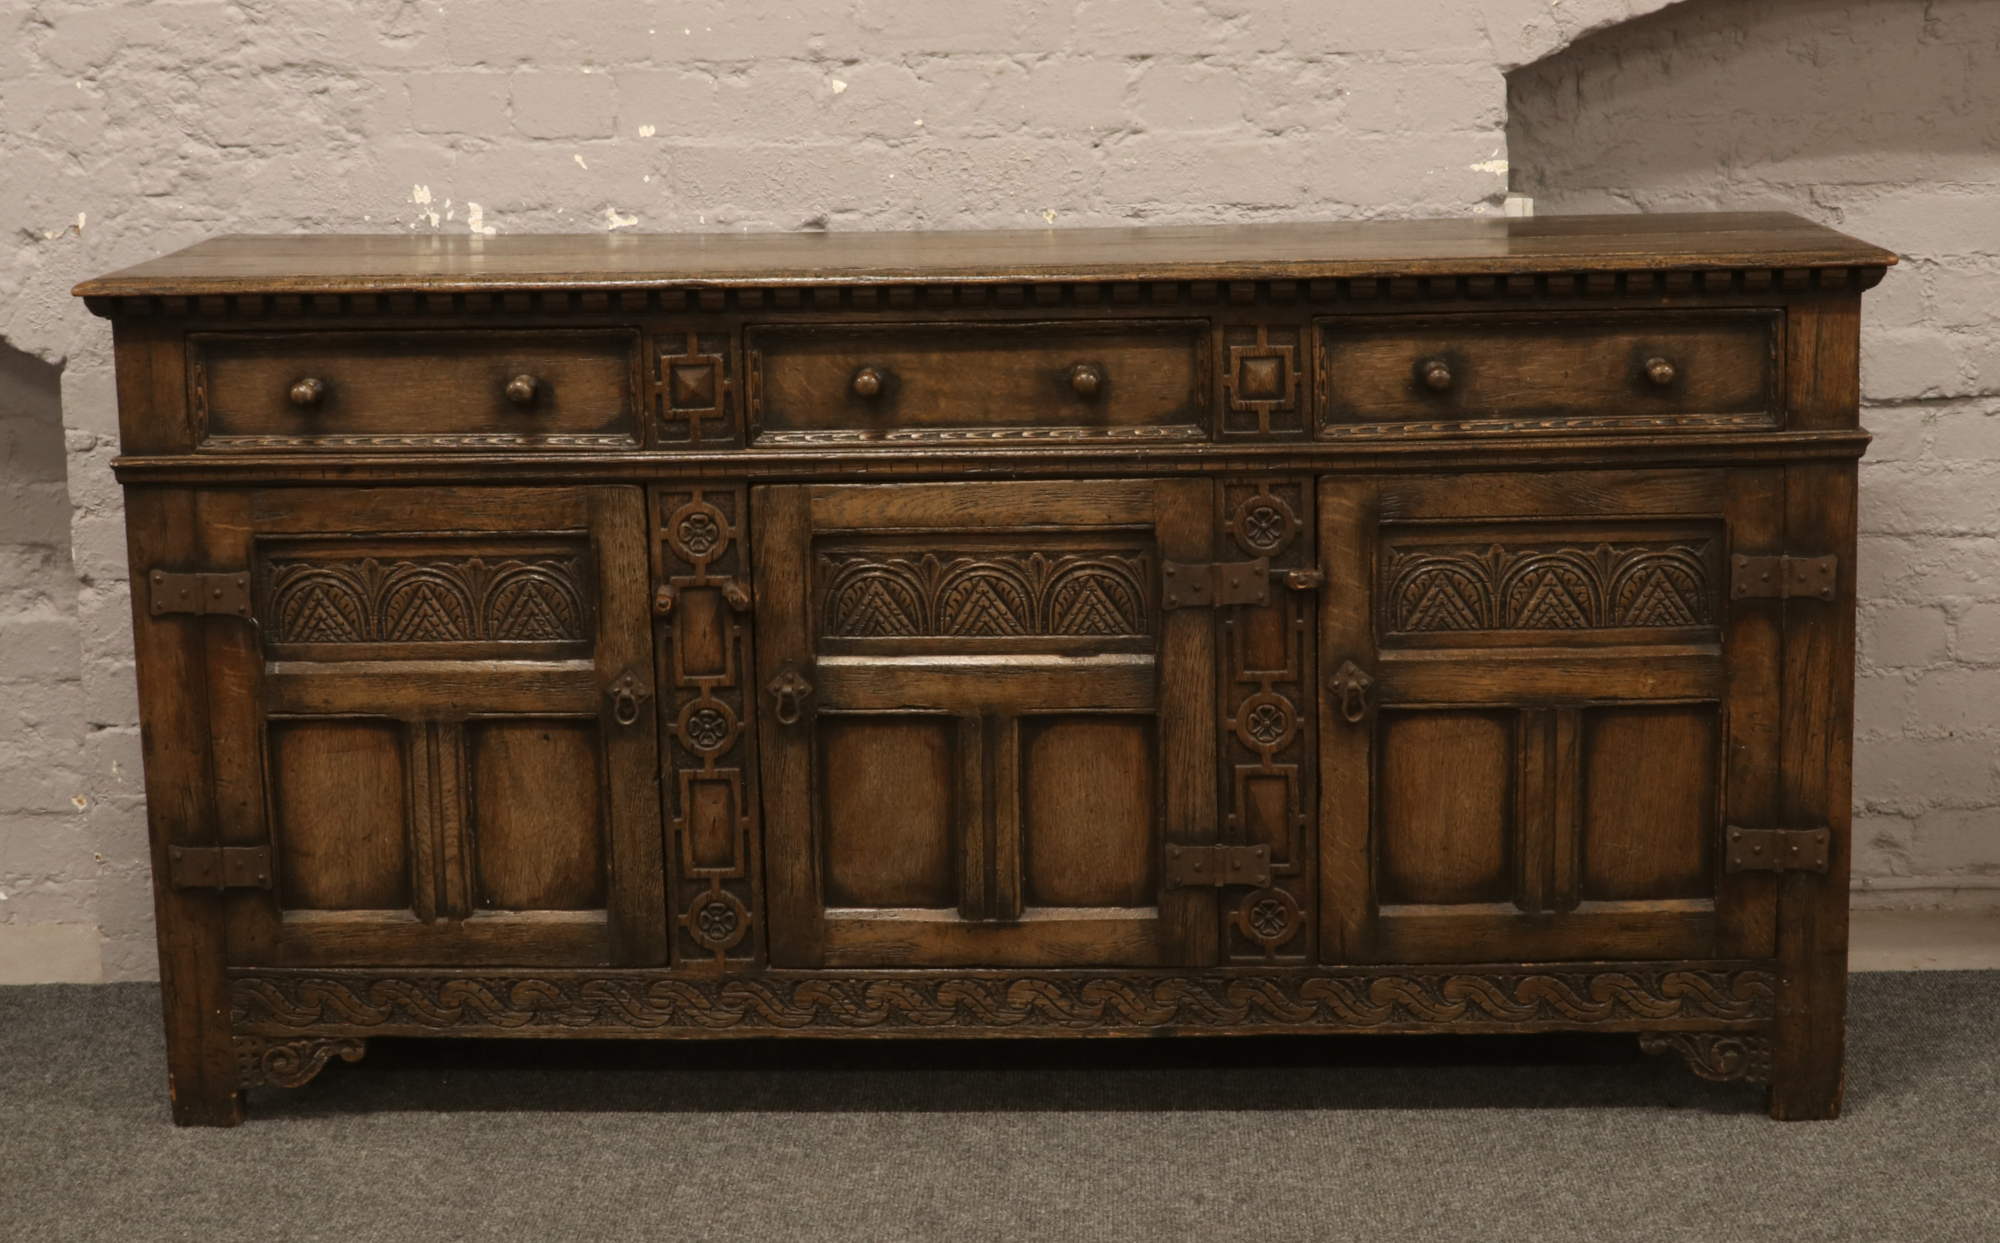 A carved and panelled oak dresser with three drawers, 183 x 92 x 49cm